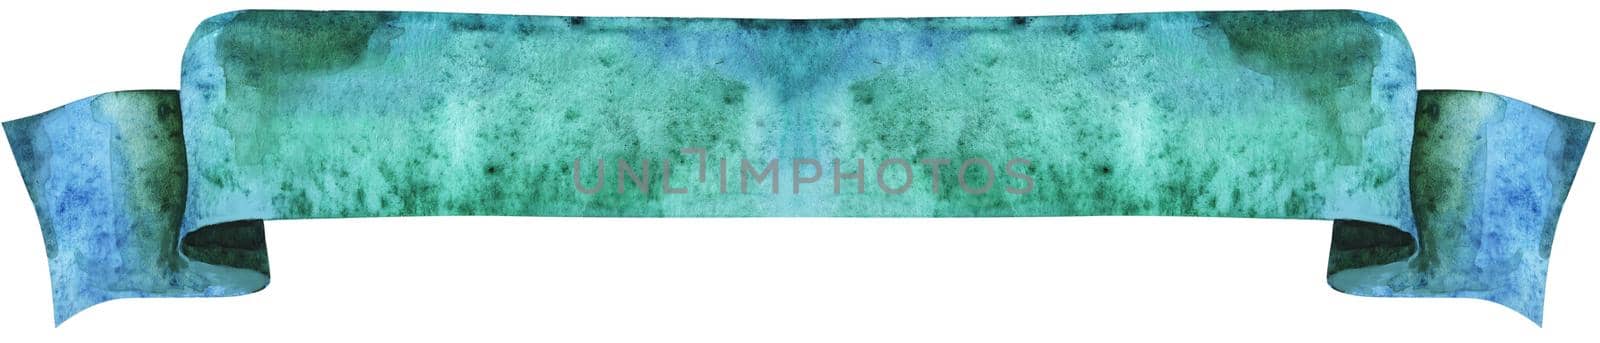 Watercolor emerald banner. Hand painted banners isolated on white background. by NataOmsk